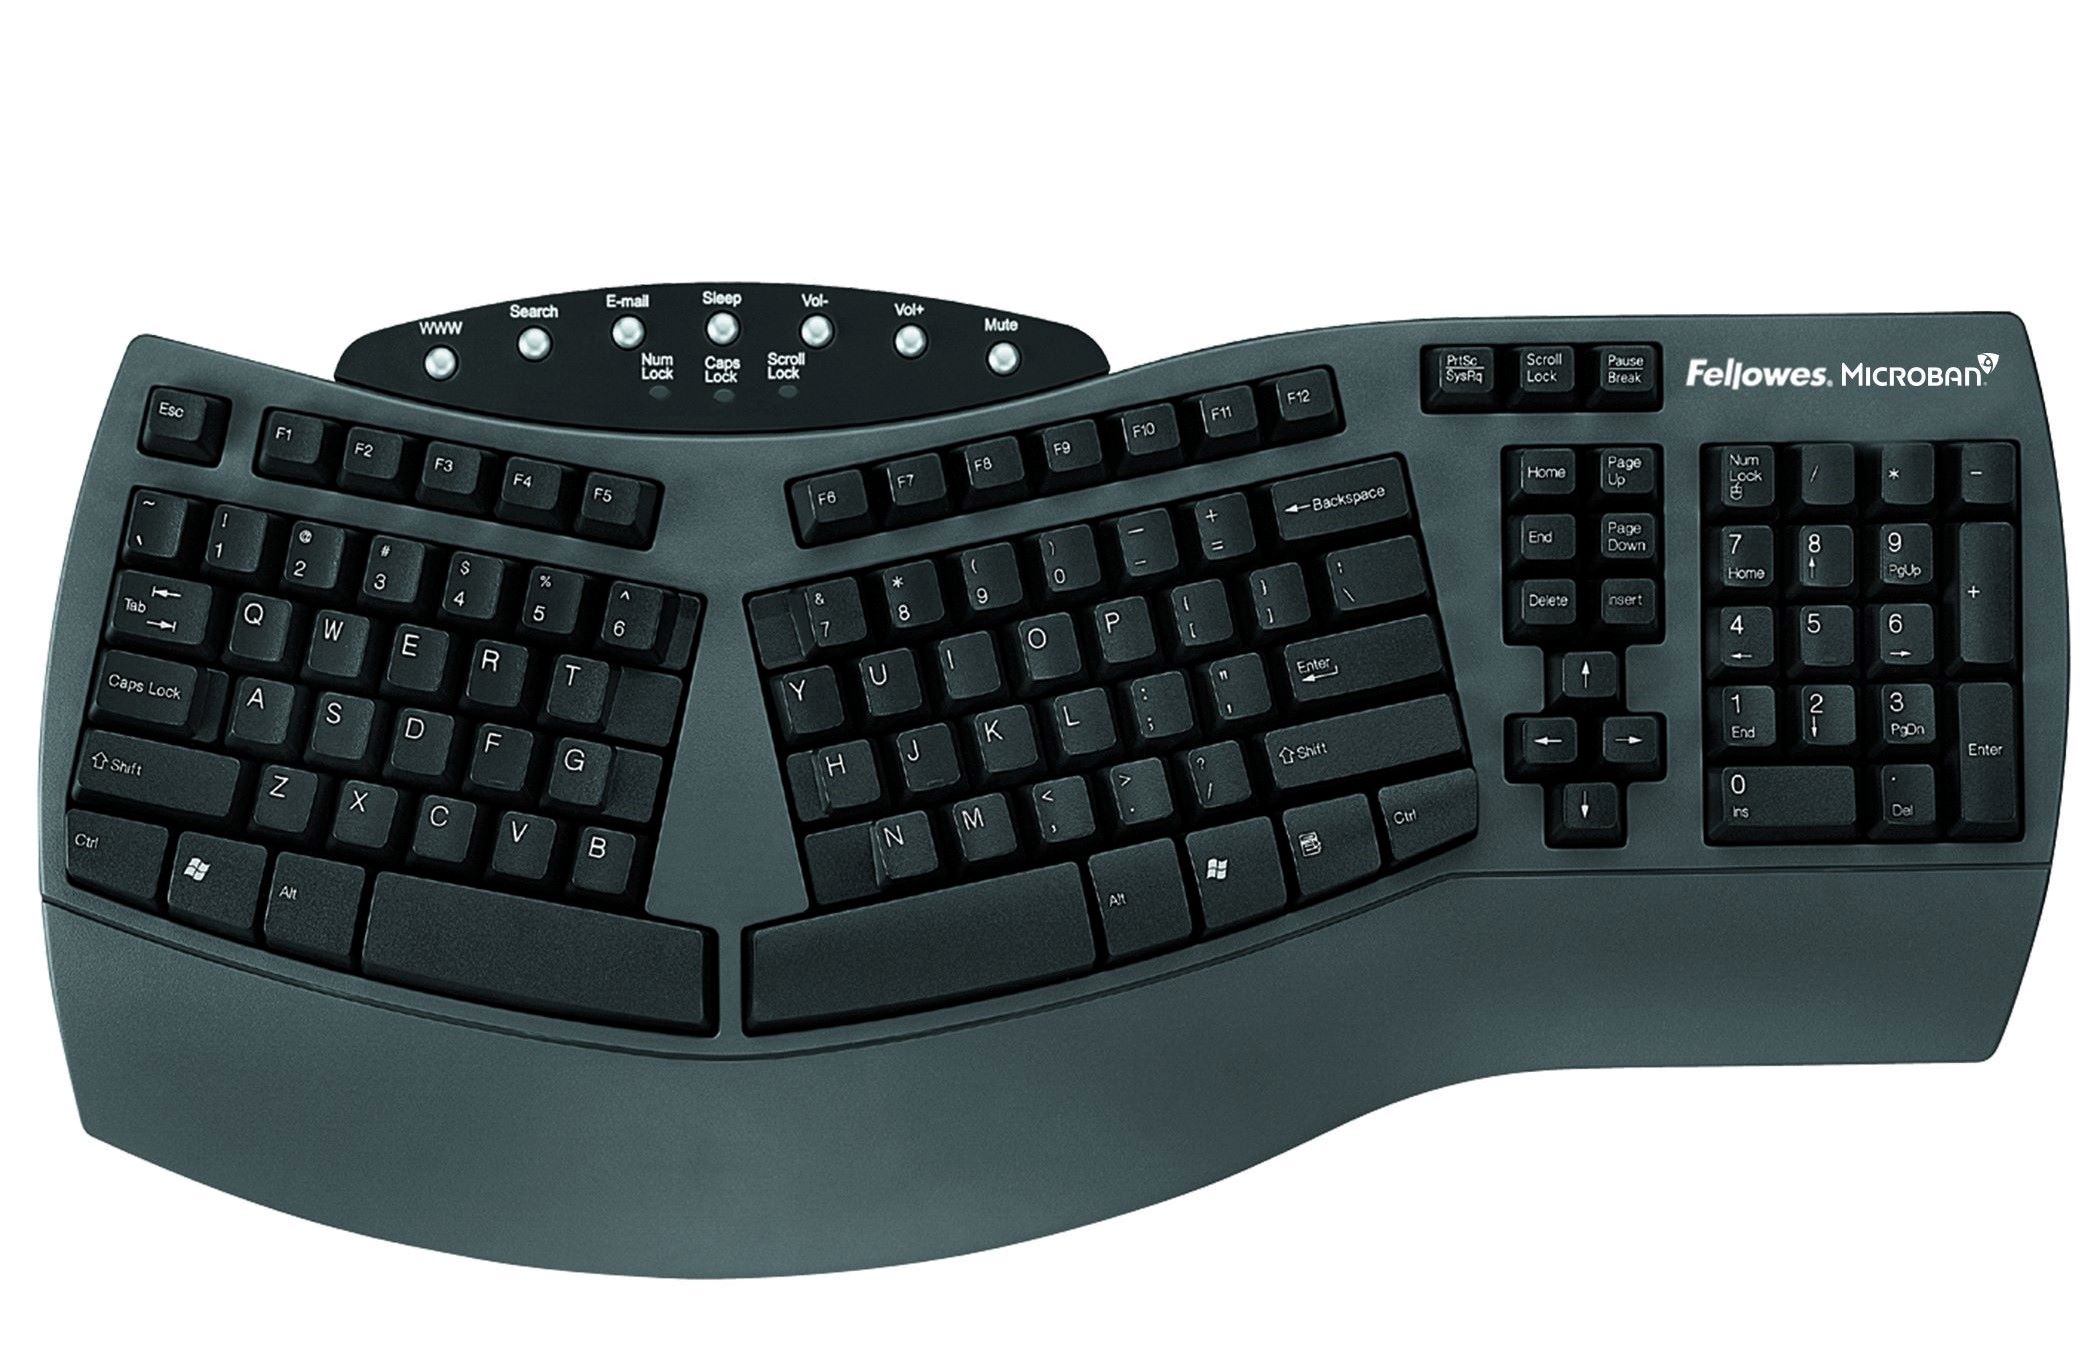 Fellowes Microban Wired Keyboard Review: The Best Budget Option